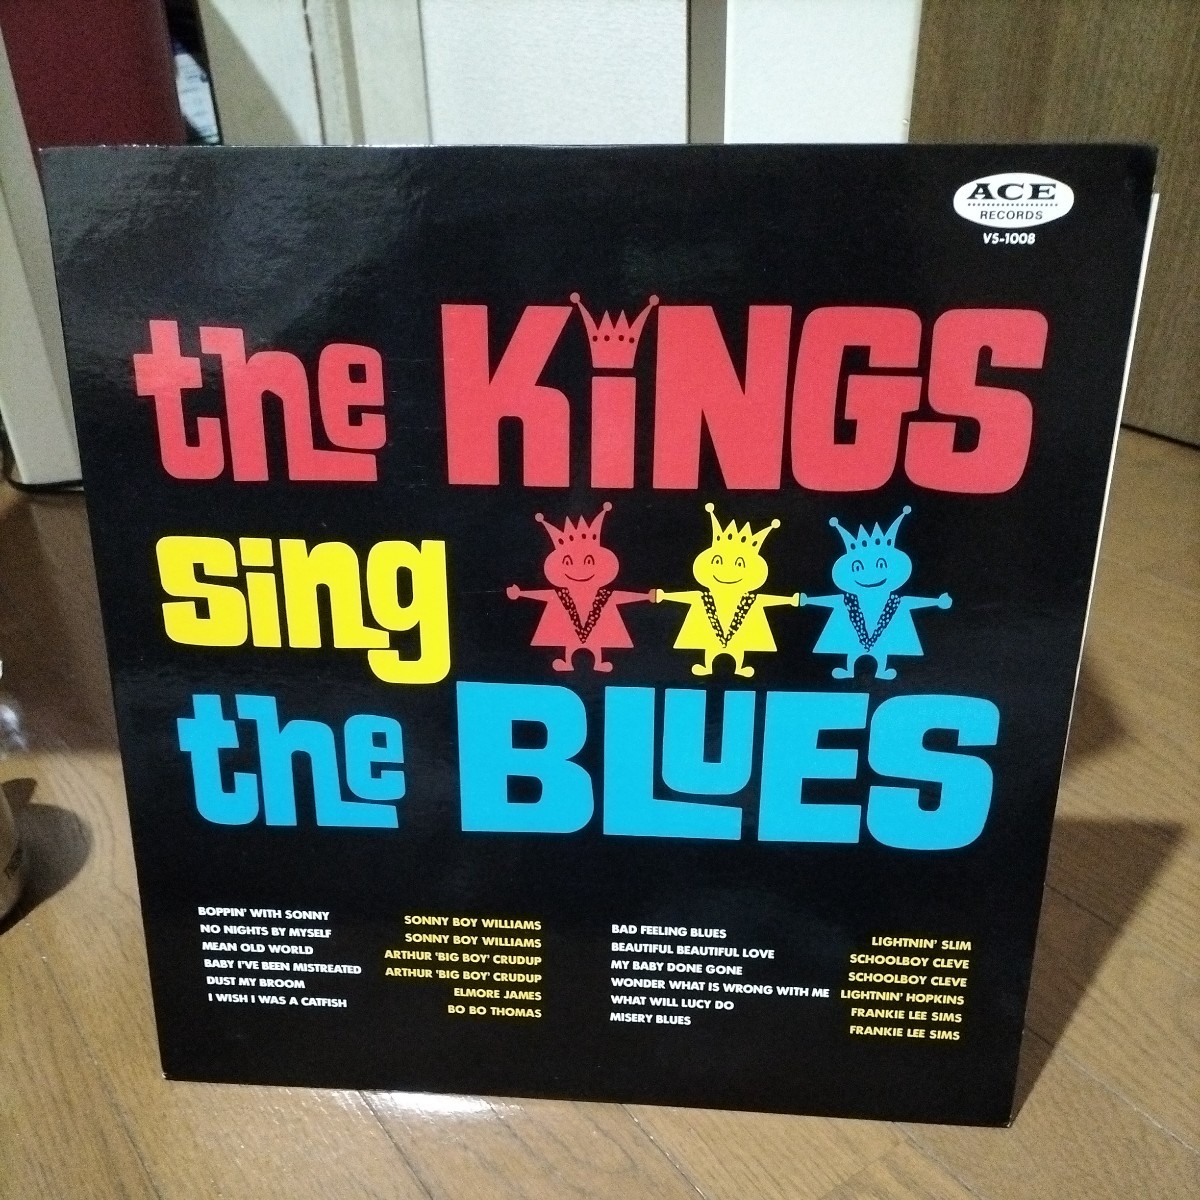  blues domestic repeated departure used record The King Sing the blues VOL.1 explanation attaching light person ho p gold s, Elmore je-ms etc. LP